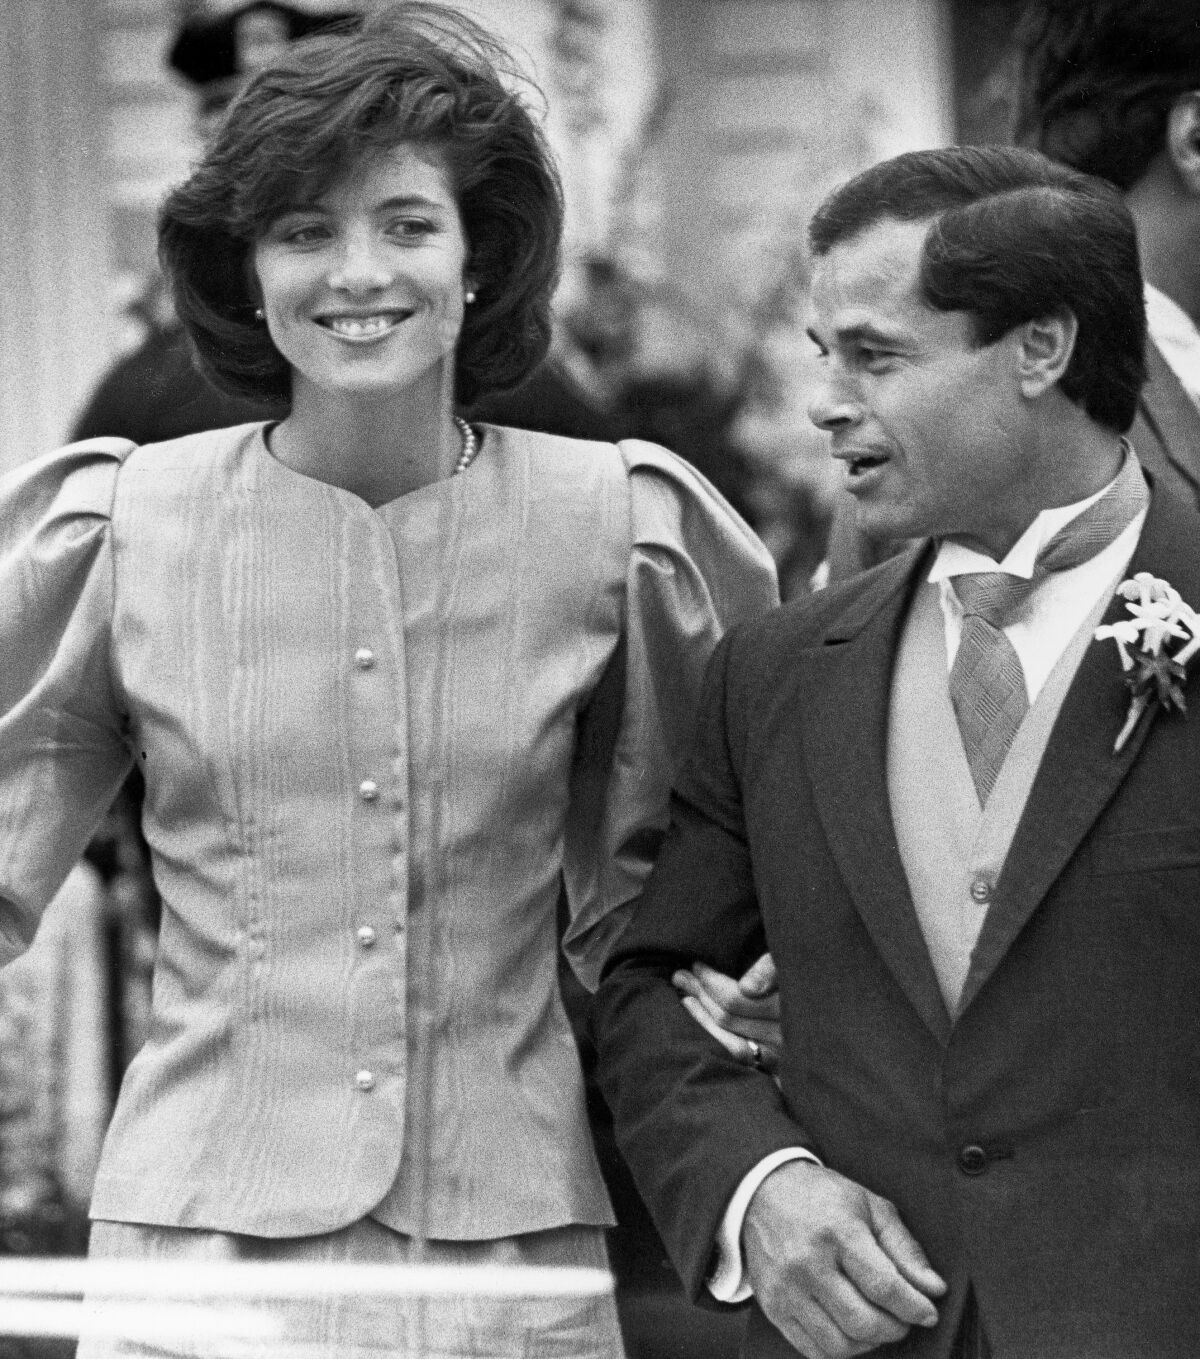 Caroline Kennedy and best man Franco Columbu leave St. Francis Xavier Church after the wedding of Caroline's cousin Maria Shriver to Arnold Schwarzenegger in Hyannis, Mass., in 1986.